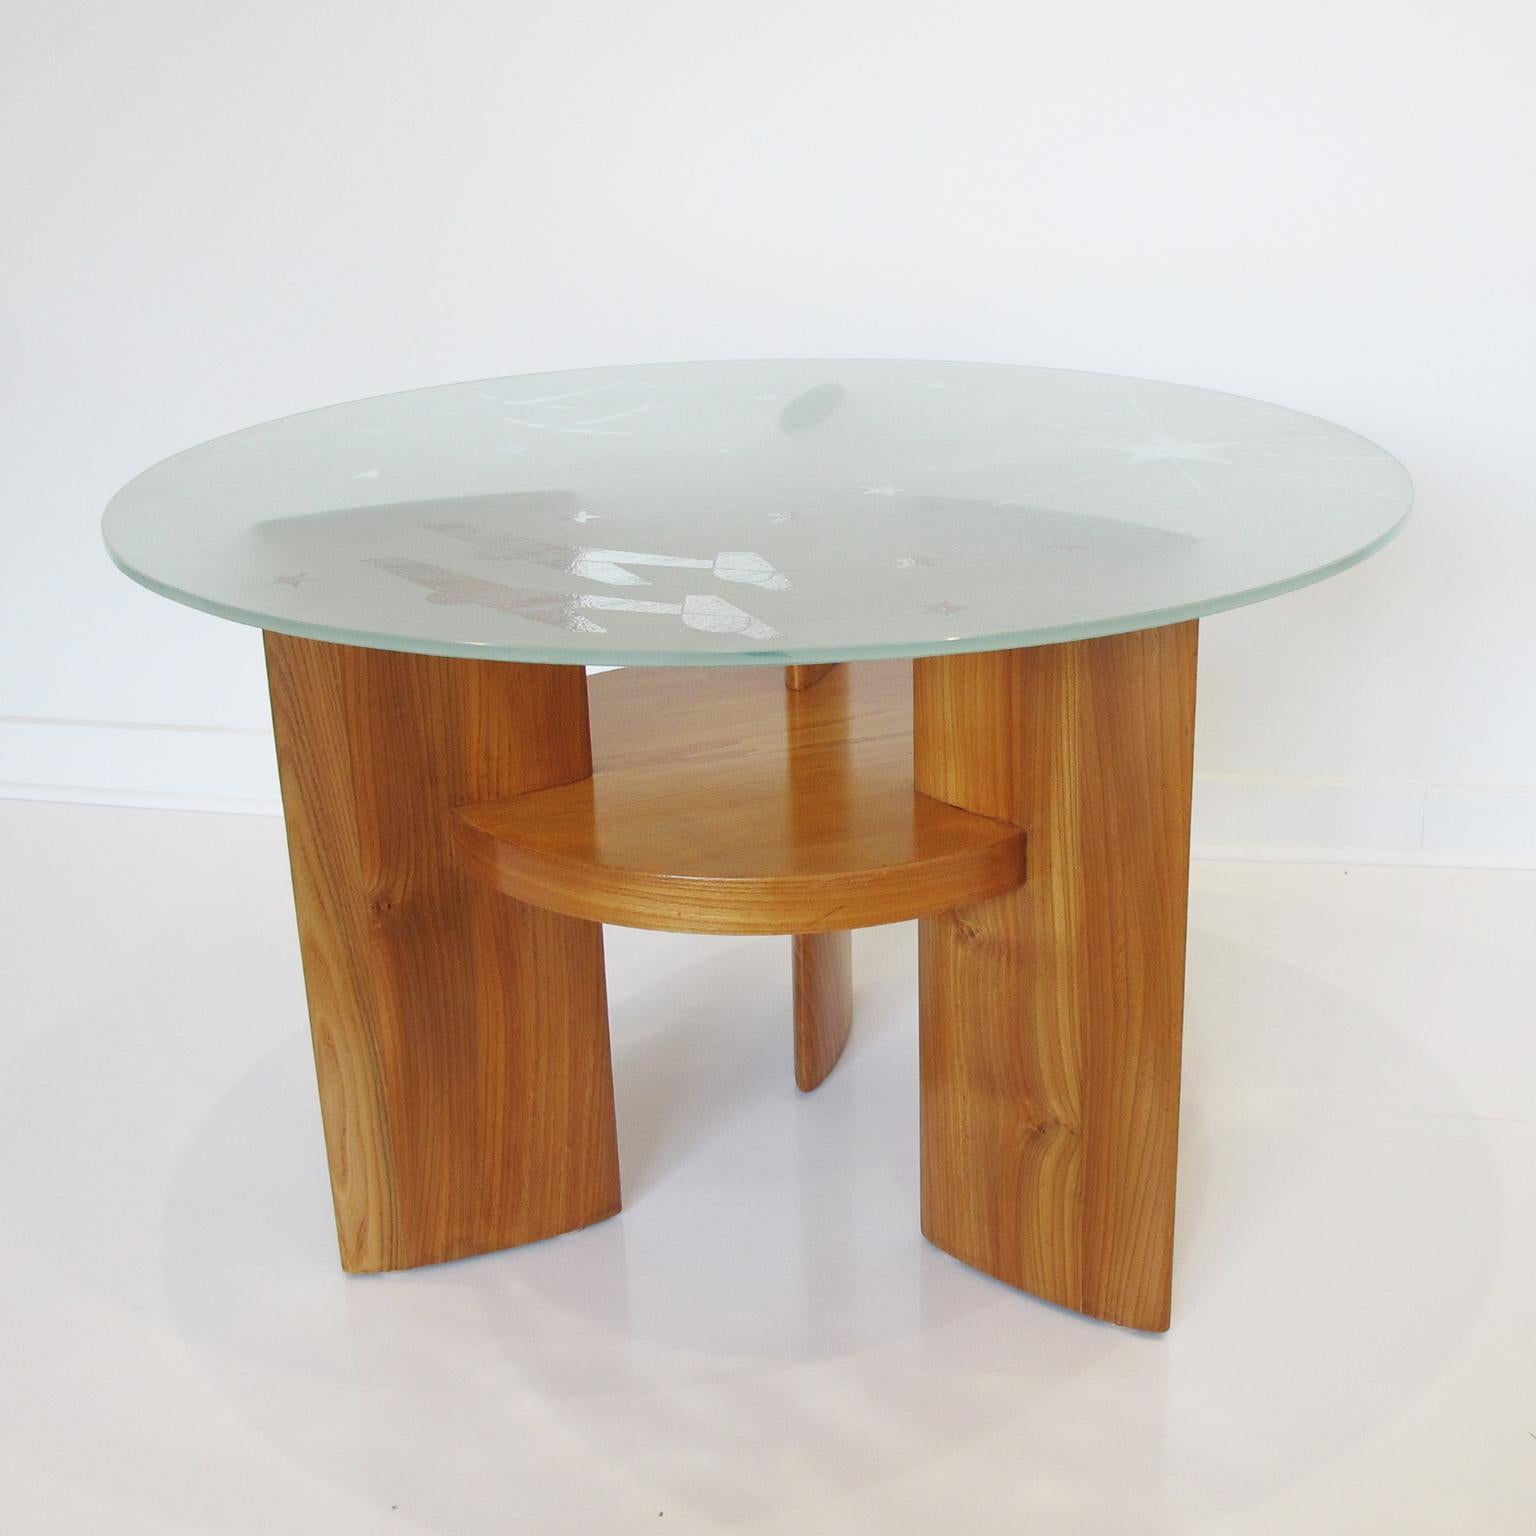 This spectacular Saint Gobain France Art Deco coffee table is a functional and handsome piece for any home. Crafted out of blond walnut, the two-tiered round Gueridon features an extra thick round glass table top made by Saint Gobain, France, with